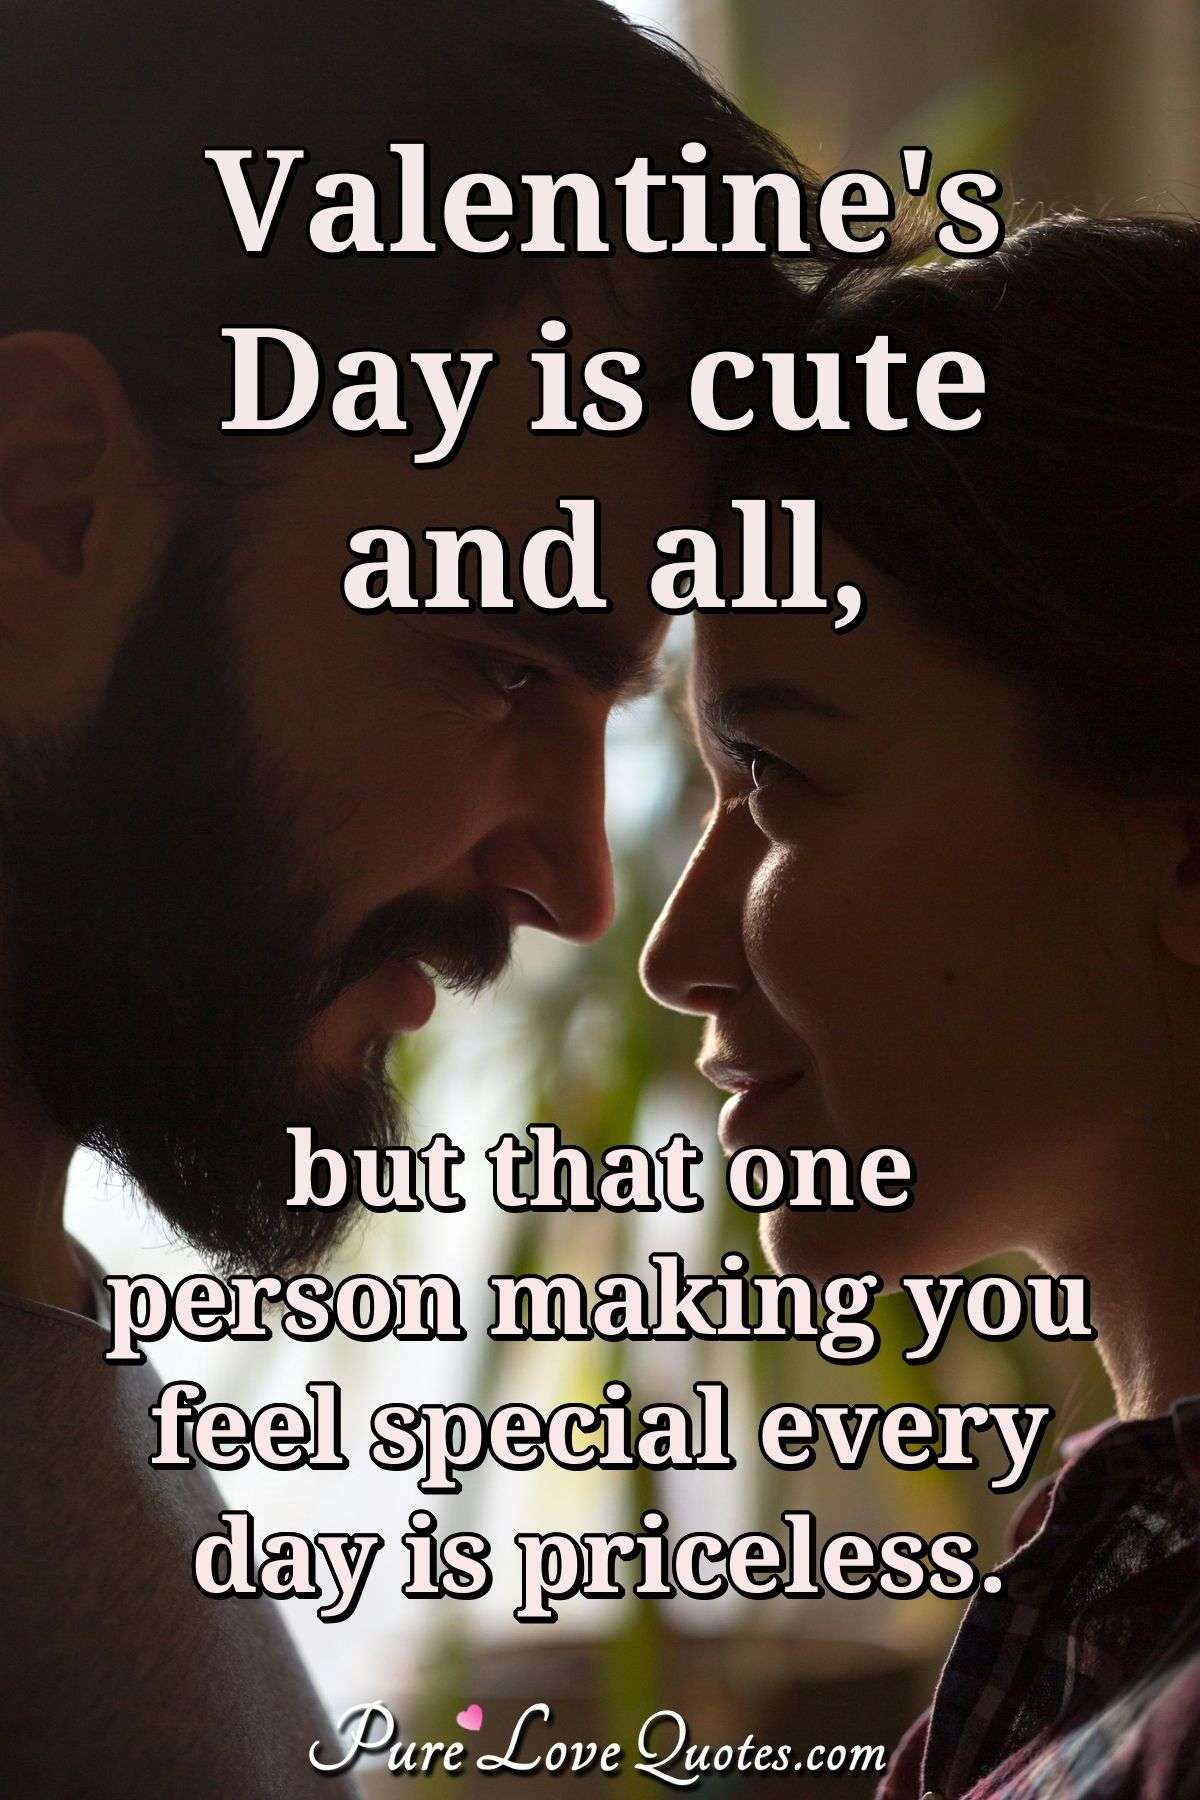 Valentine's day is cute and all, but that one person making you feel special every day is priceless. - Anonymous